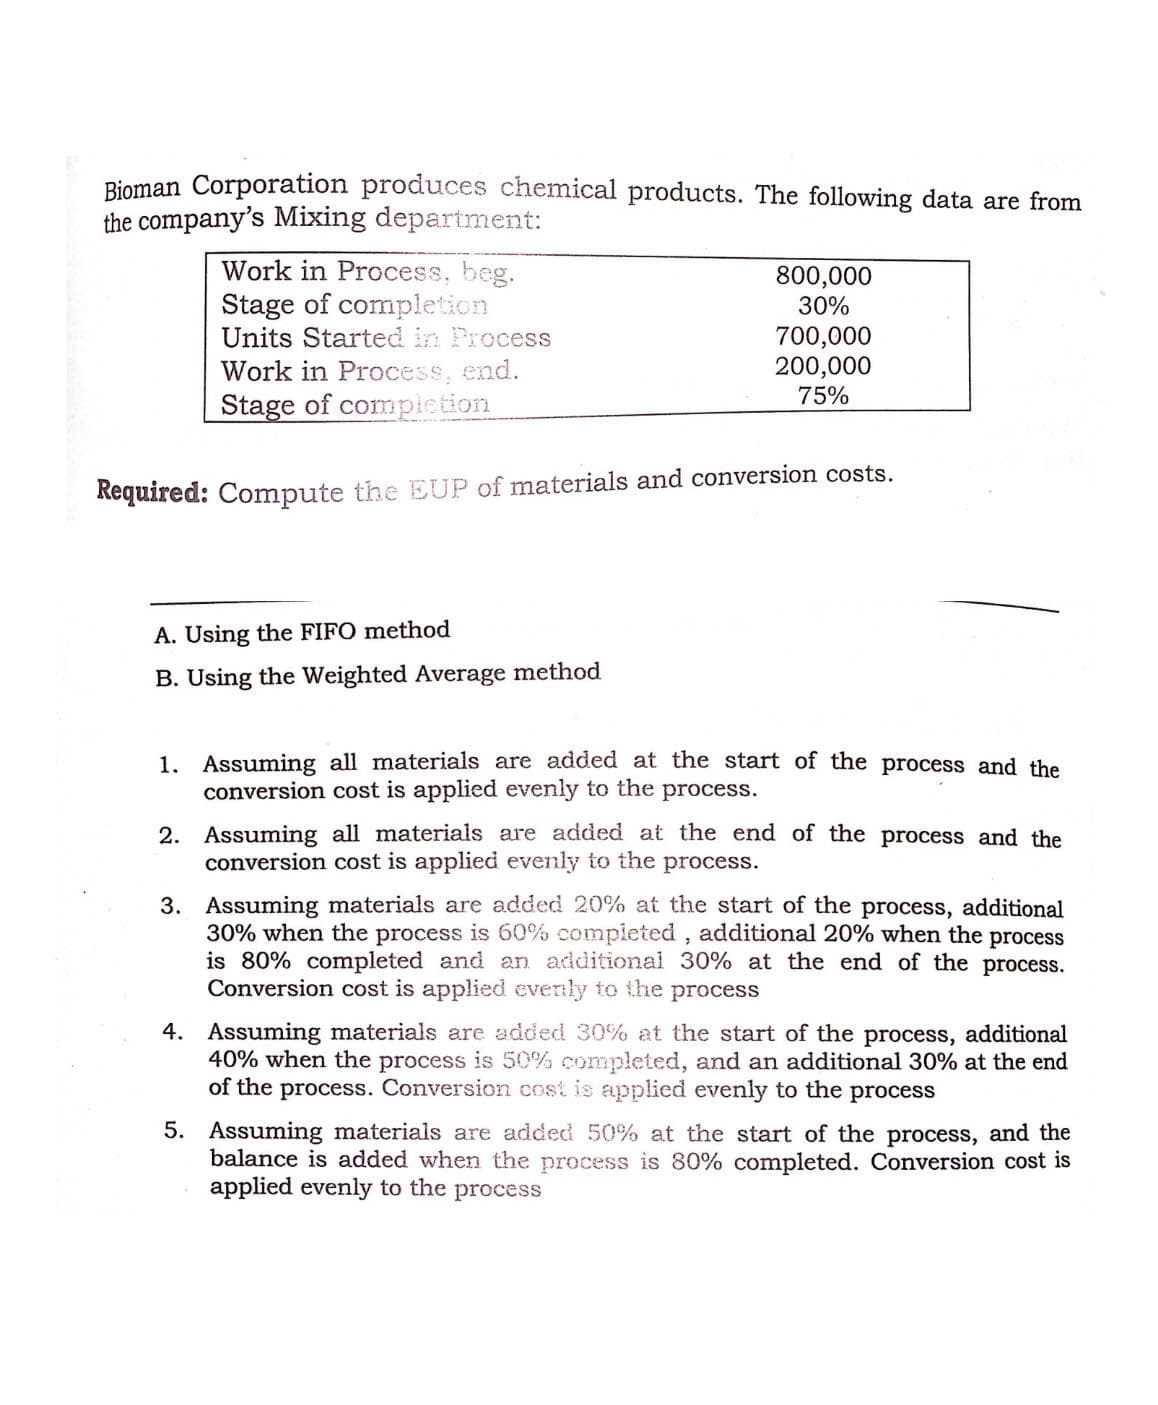 Bioman Corporation produces chemical products. The following data are from
the company's Mixing depariment:
Work in Process, beg.
Stage of completion
Units Started in Process
800,000
30%
700,000
200,000
Work in Process, end.
75%
Stage of compiction
Required: Compute the EUP of materials and conversion costs.
A. Using the FIFO method
B. Using the Weighted Average method
1. Assuming all materials are added at the start of the process and the
conversion cost is applied evenly to the process.
2. Assuming all materials are added at the end of the process and the
conversion cost is applied evenly to the process.
3. Assuming materials are added 20% at the start of the process, additional
30% when the process is 60% completed , additional 20% when the process
is 80% completed and an additional 30% at the end of the process.
Conversion cost is applied evenly to the process
4. Assuming materials are added 30% at the start of the process, additional
40% when the process is 50% completed, and an additional 30% at the end
of the process. Conversion cost is applied evenly to the process
5. Assuming materials are added 50% at the start of the process, and the
balance is added when the process is 80% completed. Conversion cost is
applied evenly to the process
